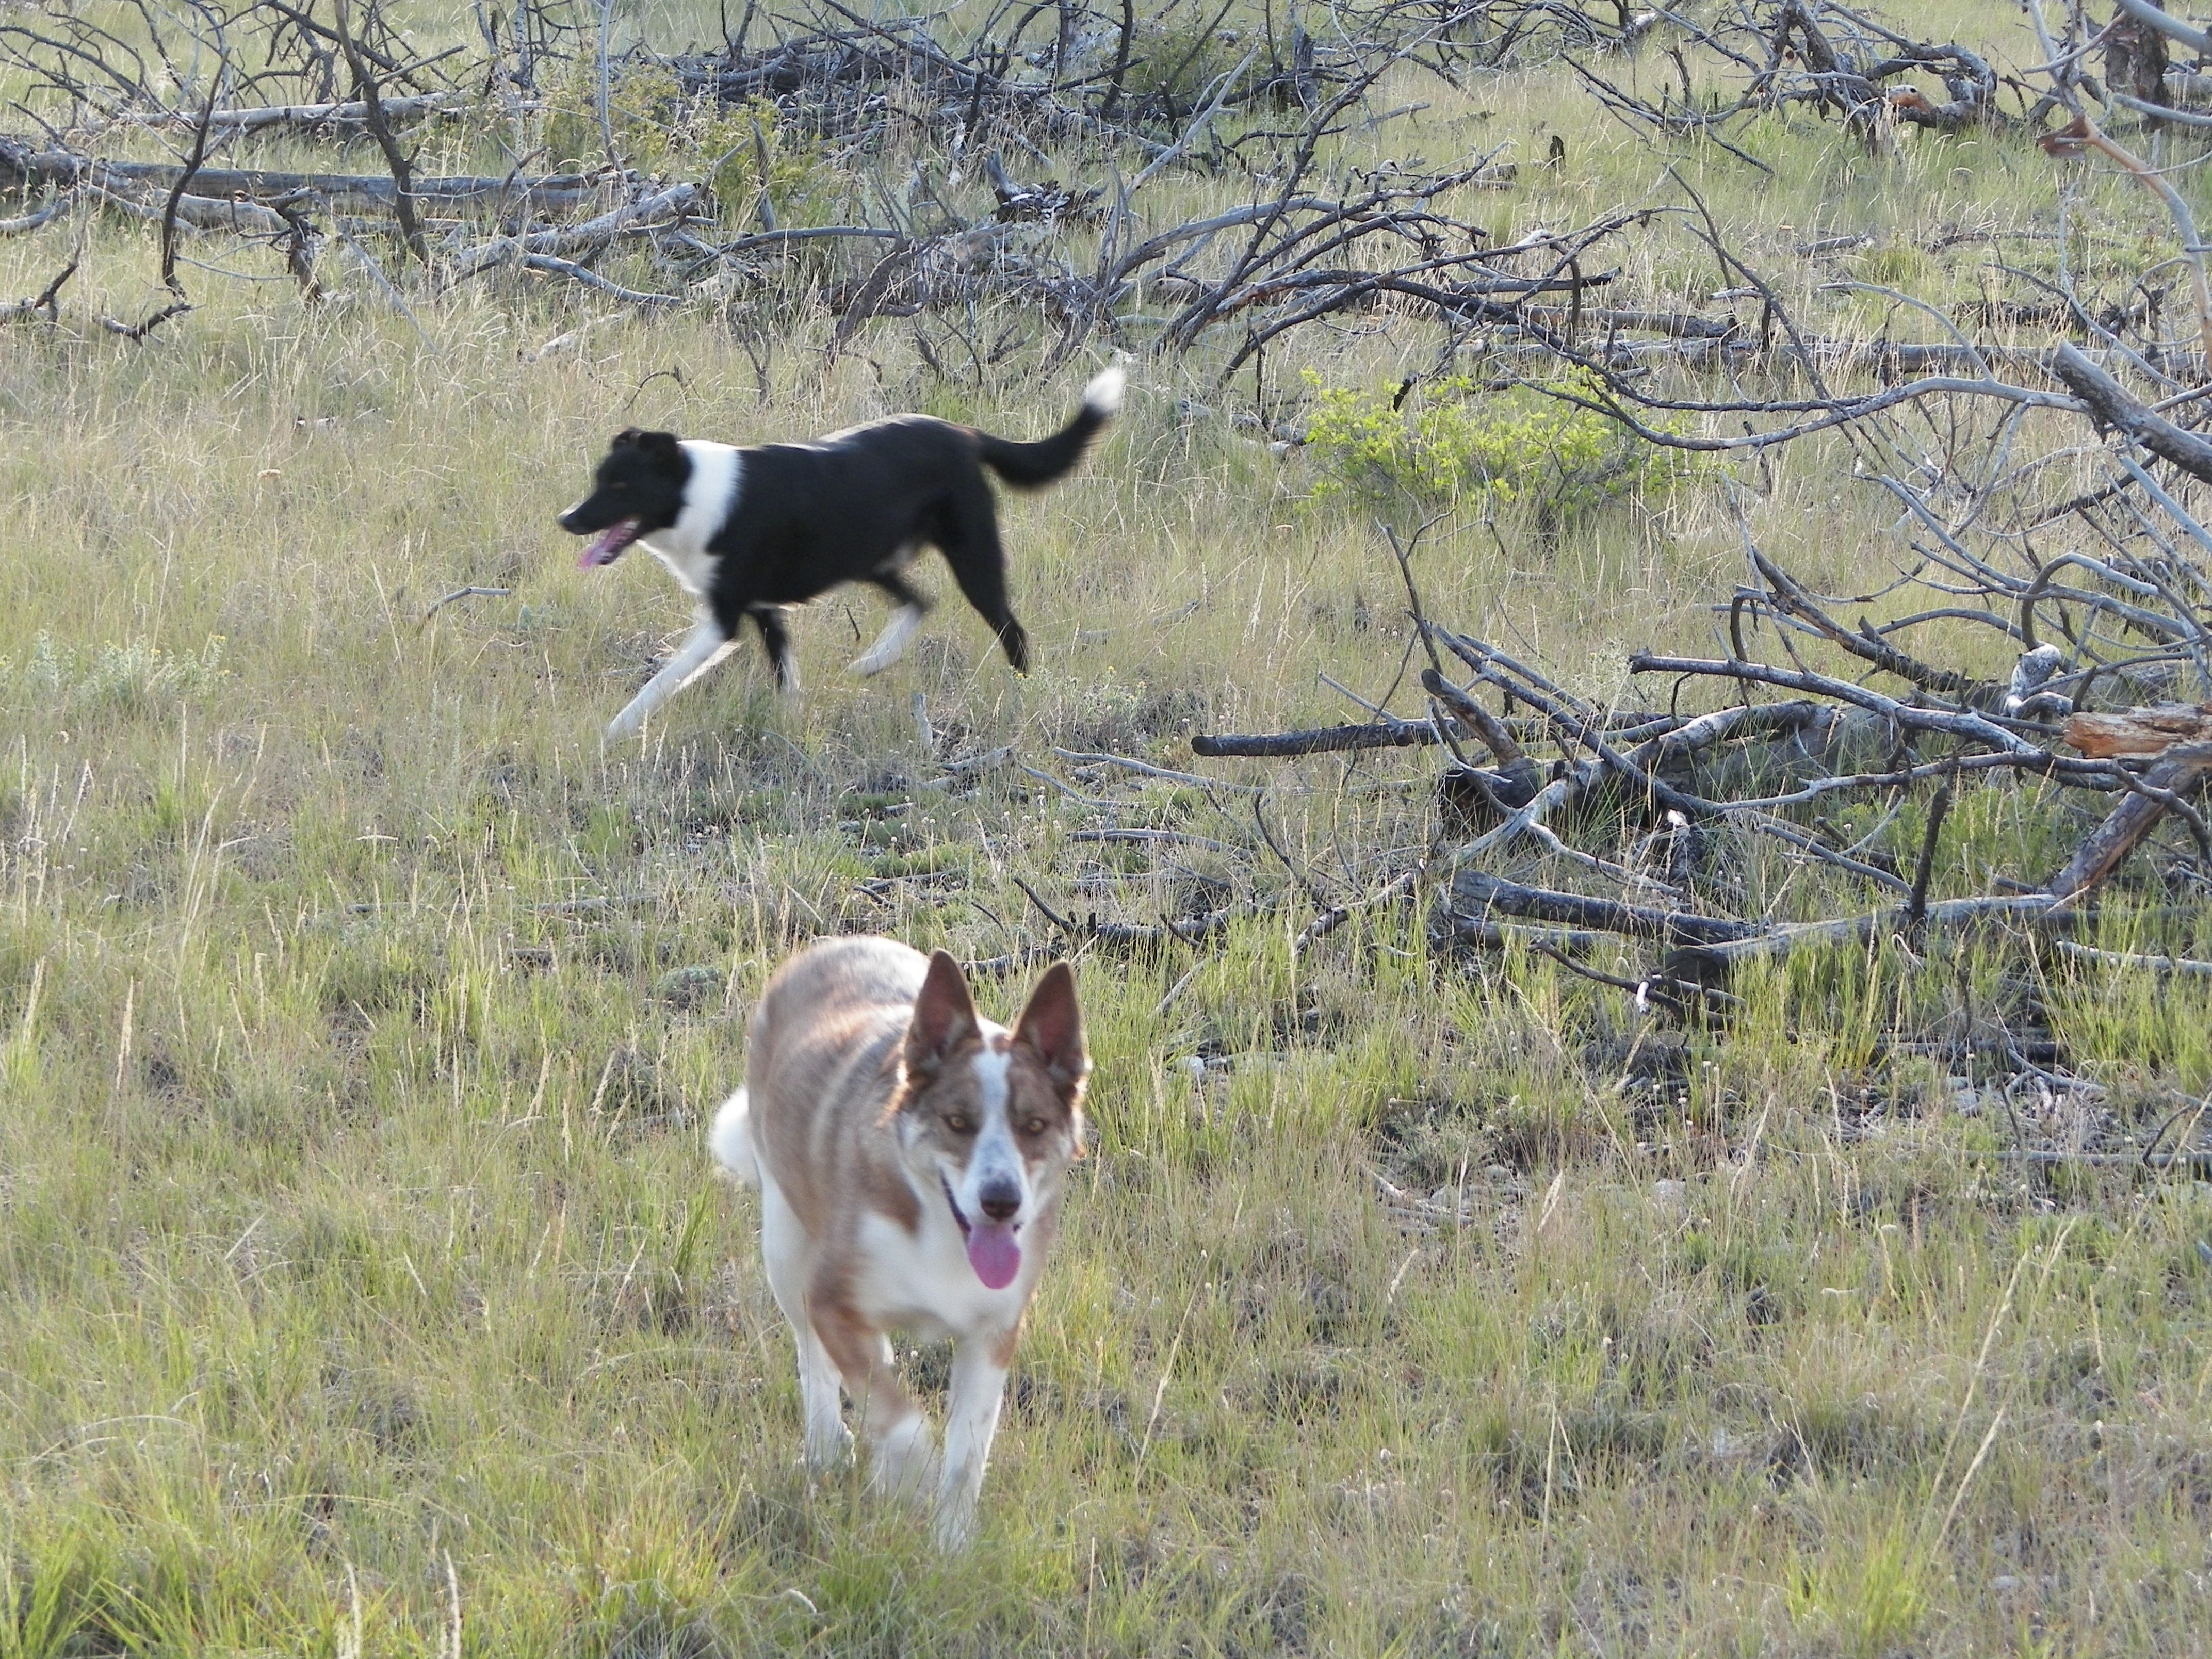 Toby and Maya romp through some scrubland in the Southwest.